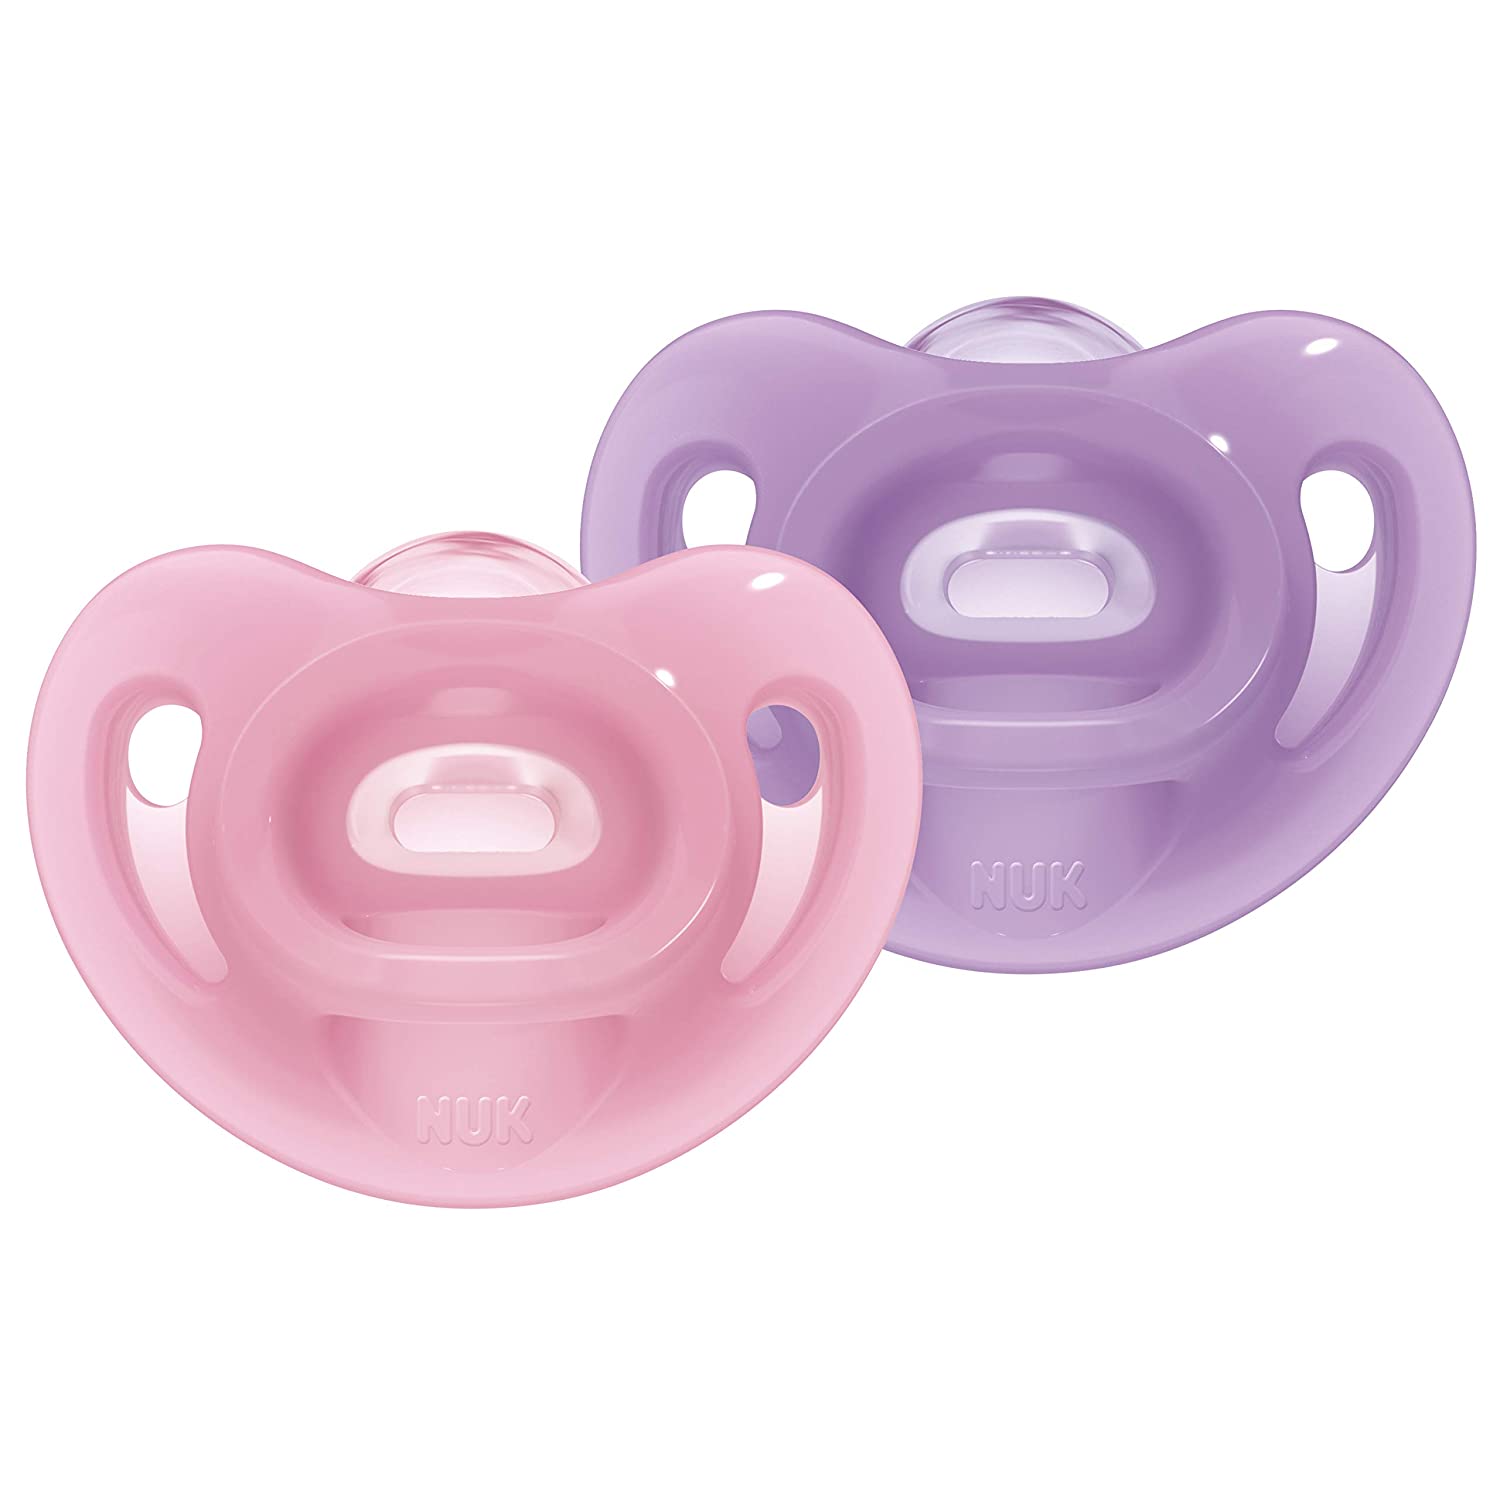 NUK Sensitive Dummy, 6-18 Months, 100% Silicone for Delicate Skin, BPA-Free, Purple & Pink, Pack of 2